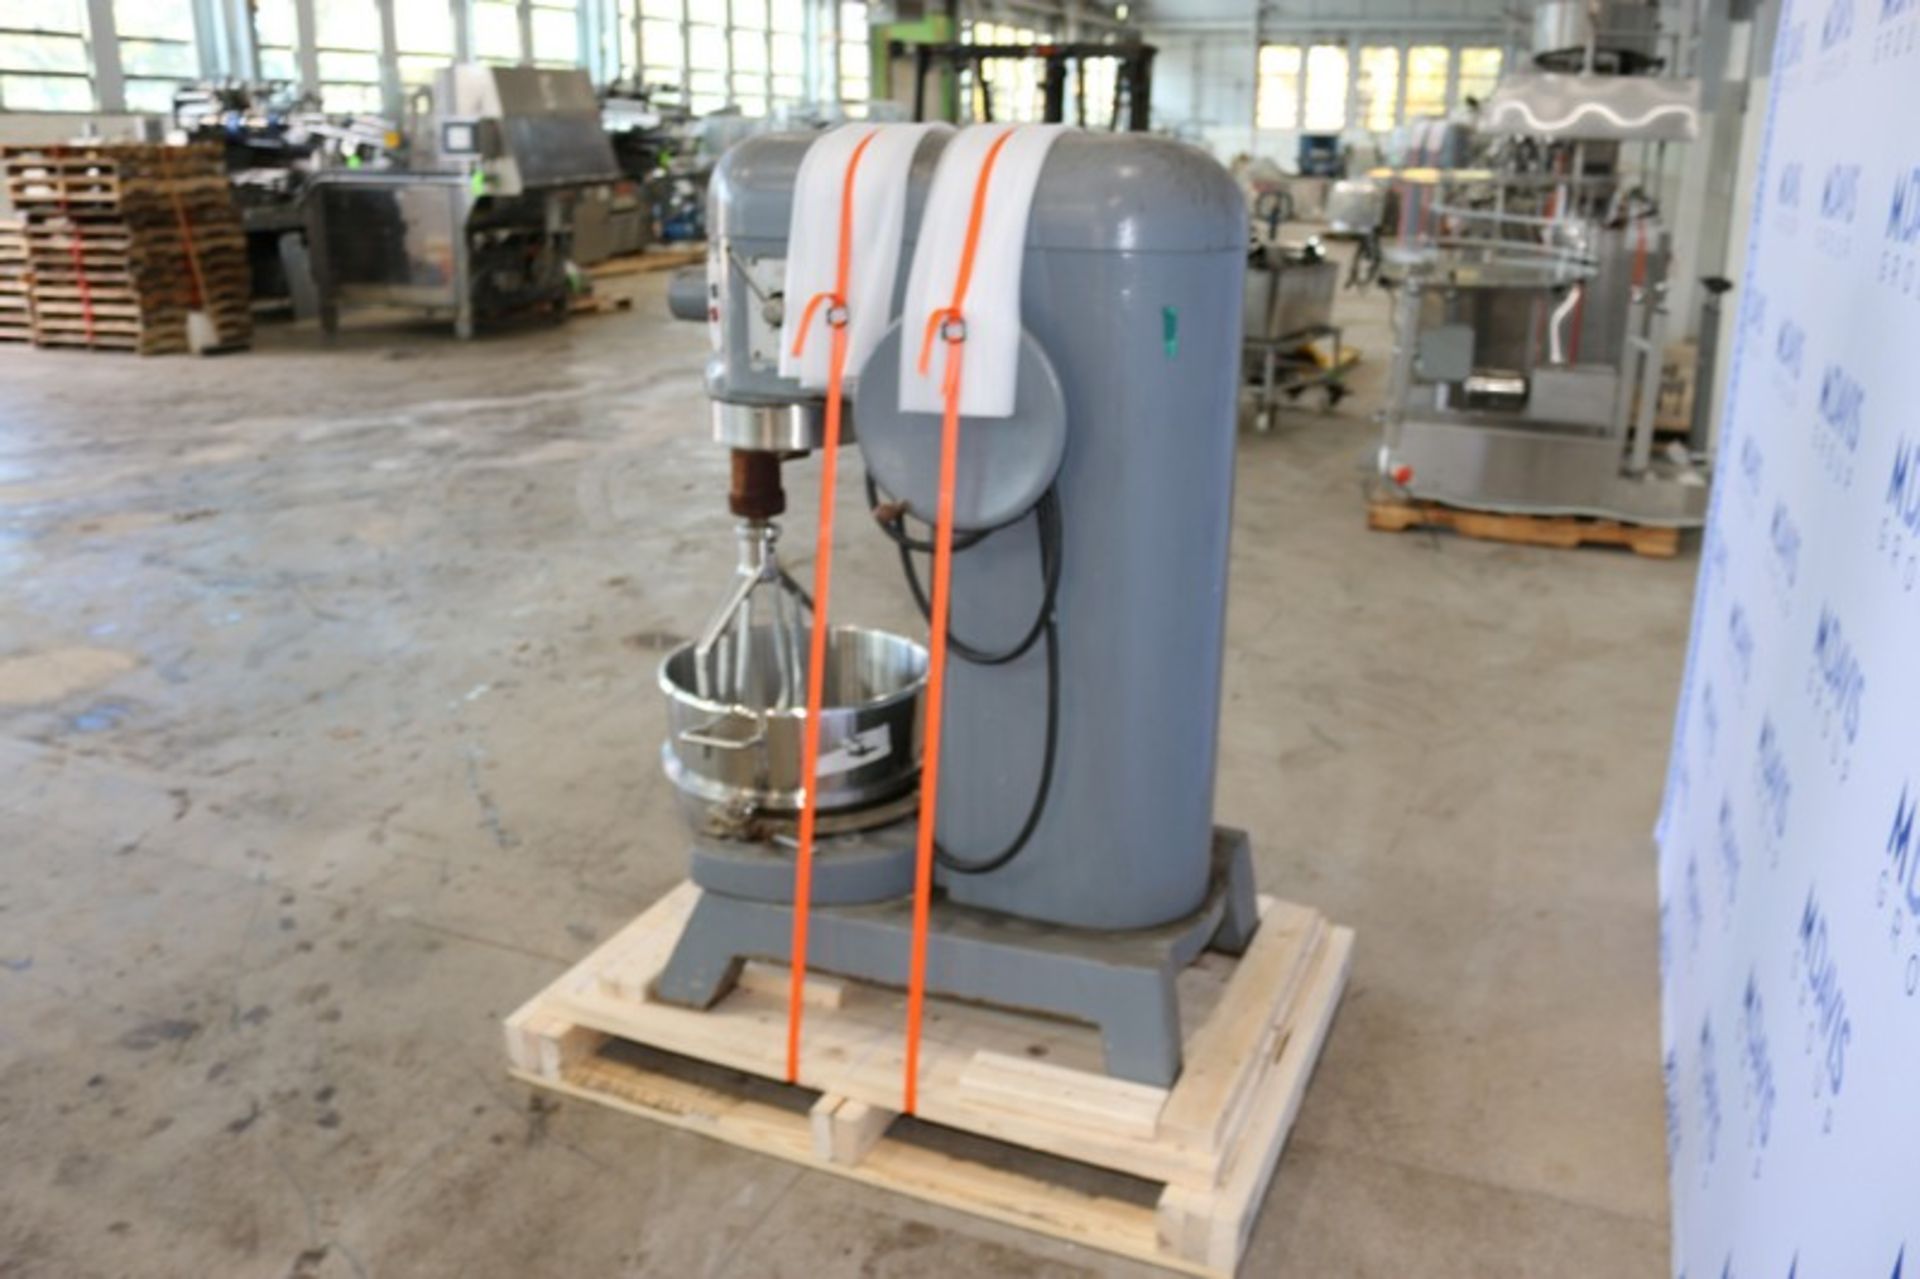 Hobart Mixer,-M/N L-800, S/N 11-213-617, 200 Volts, 1725 RPM Motor, with 1-1/2 hp Motor, with S/S - Image 5 of 6